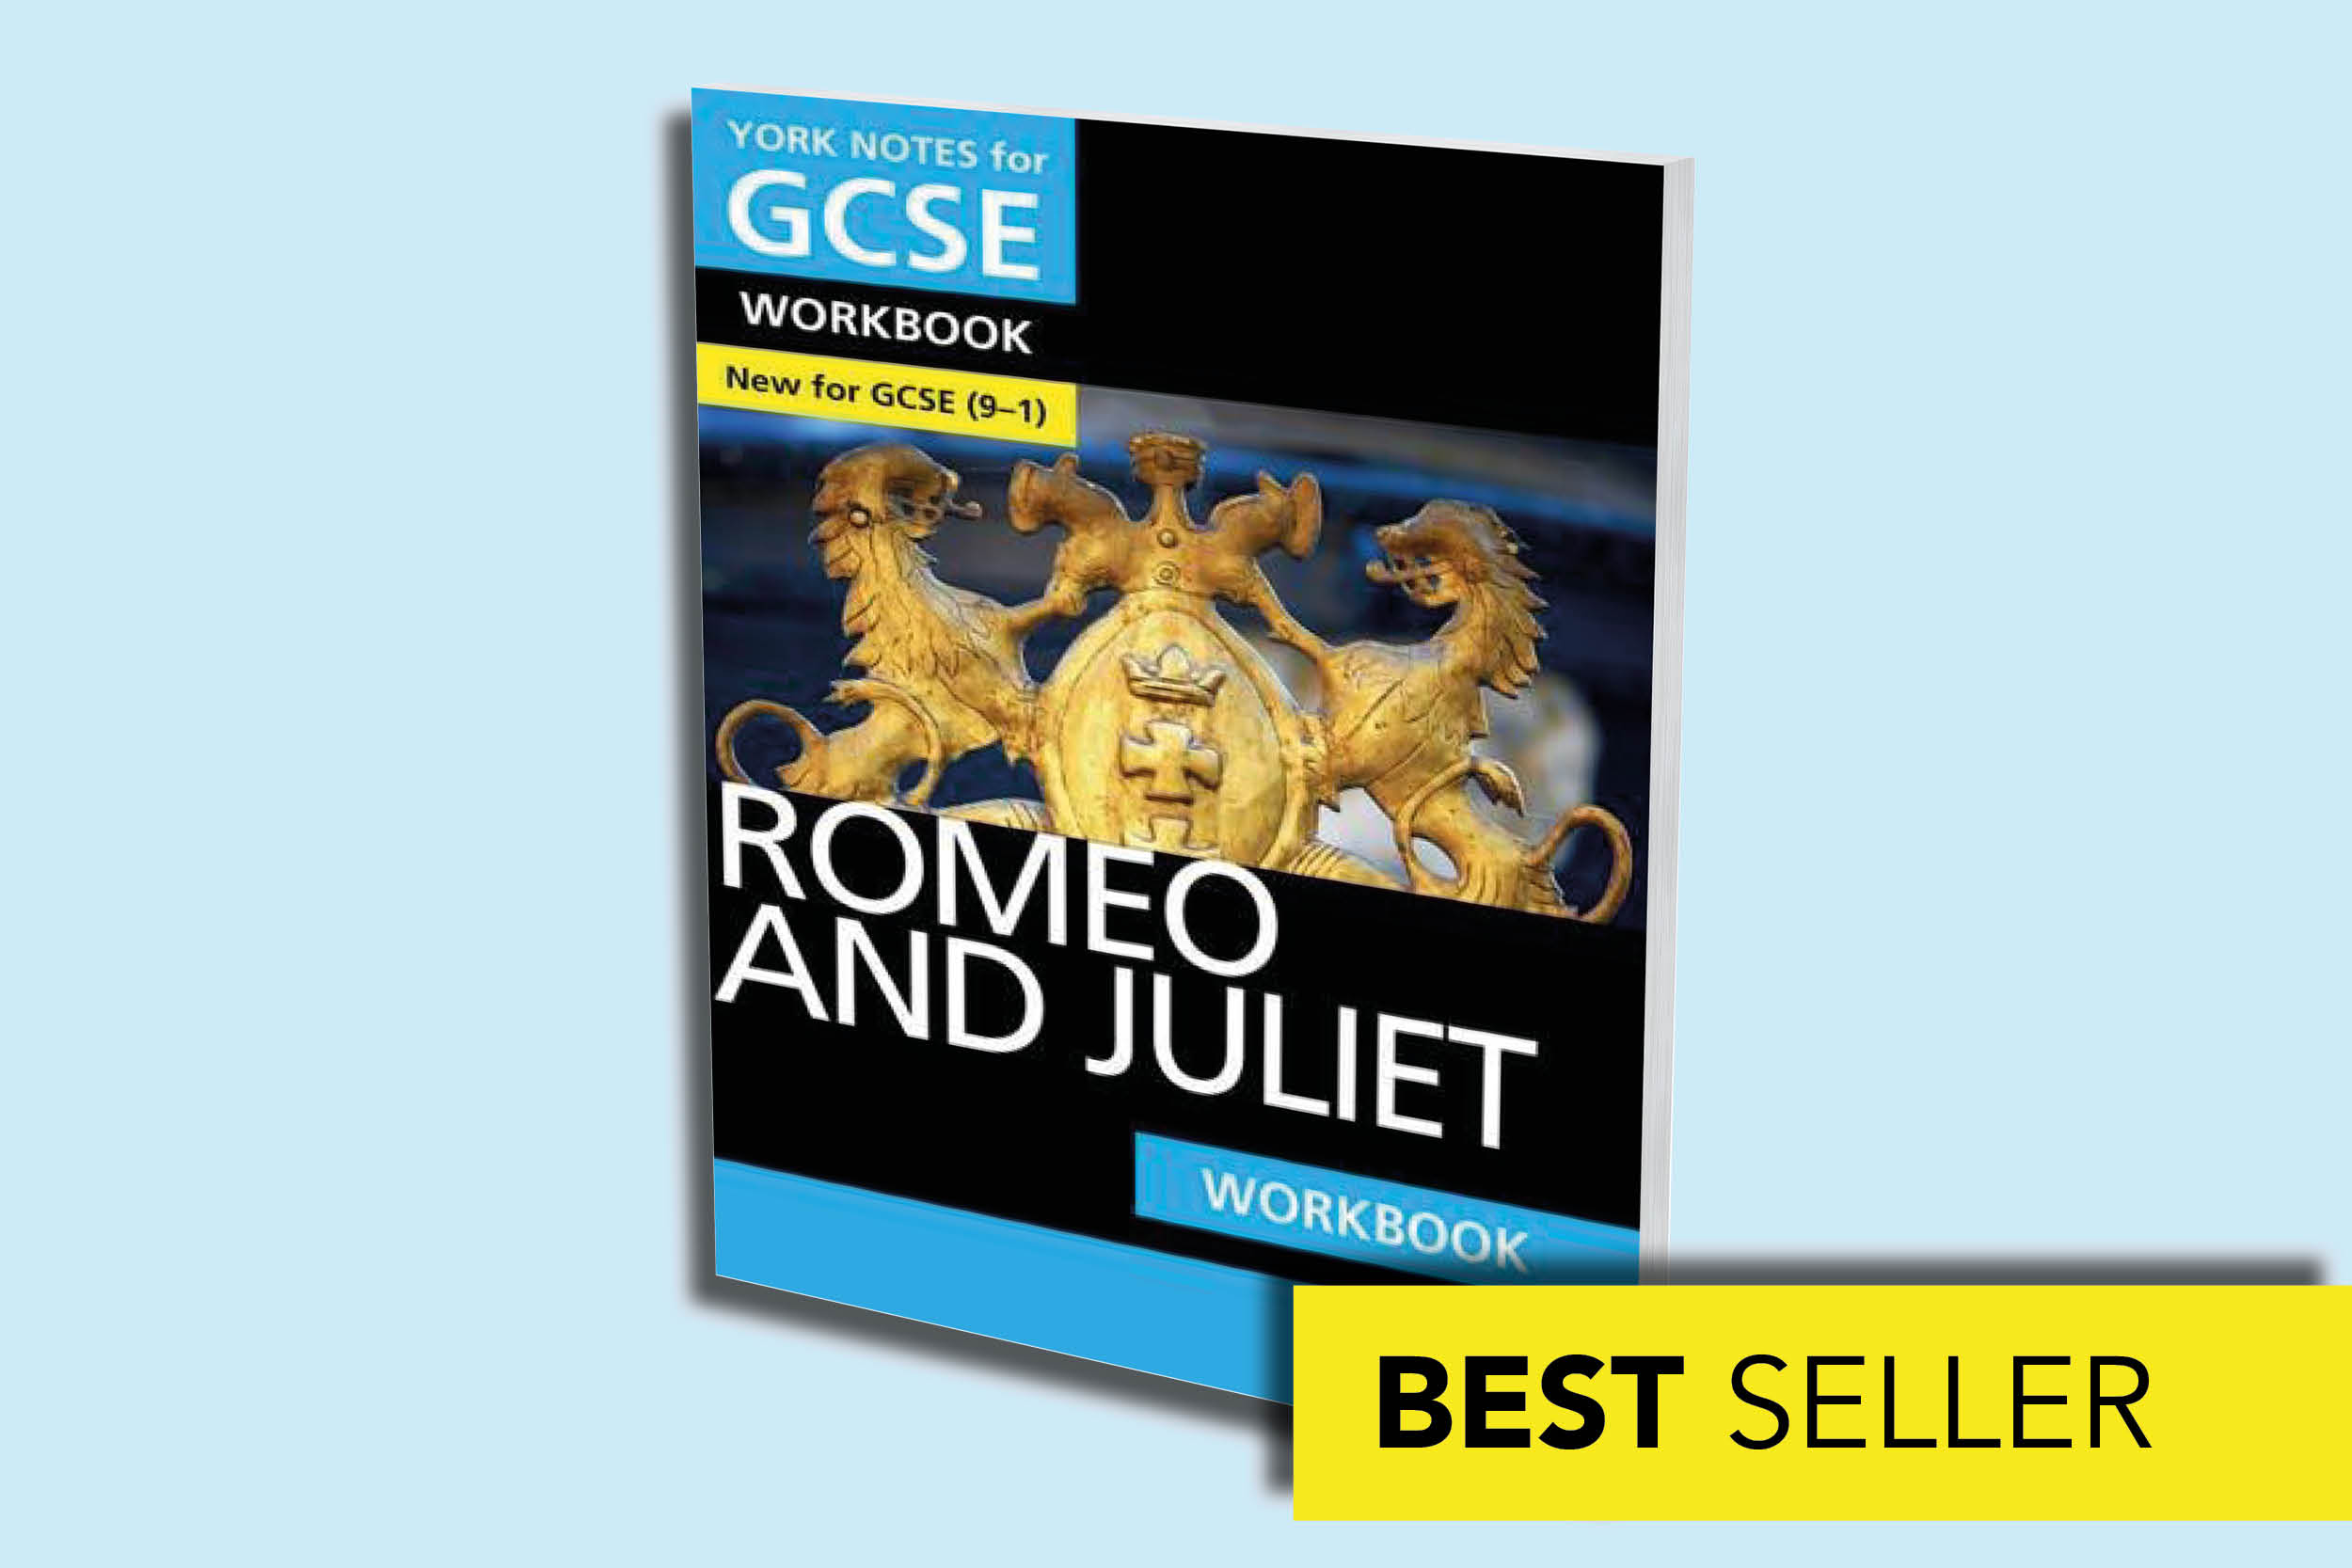 book review of romeo and juliet wikipedia